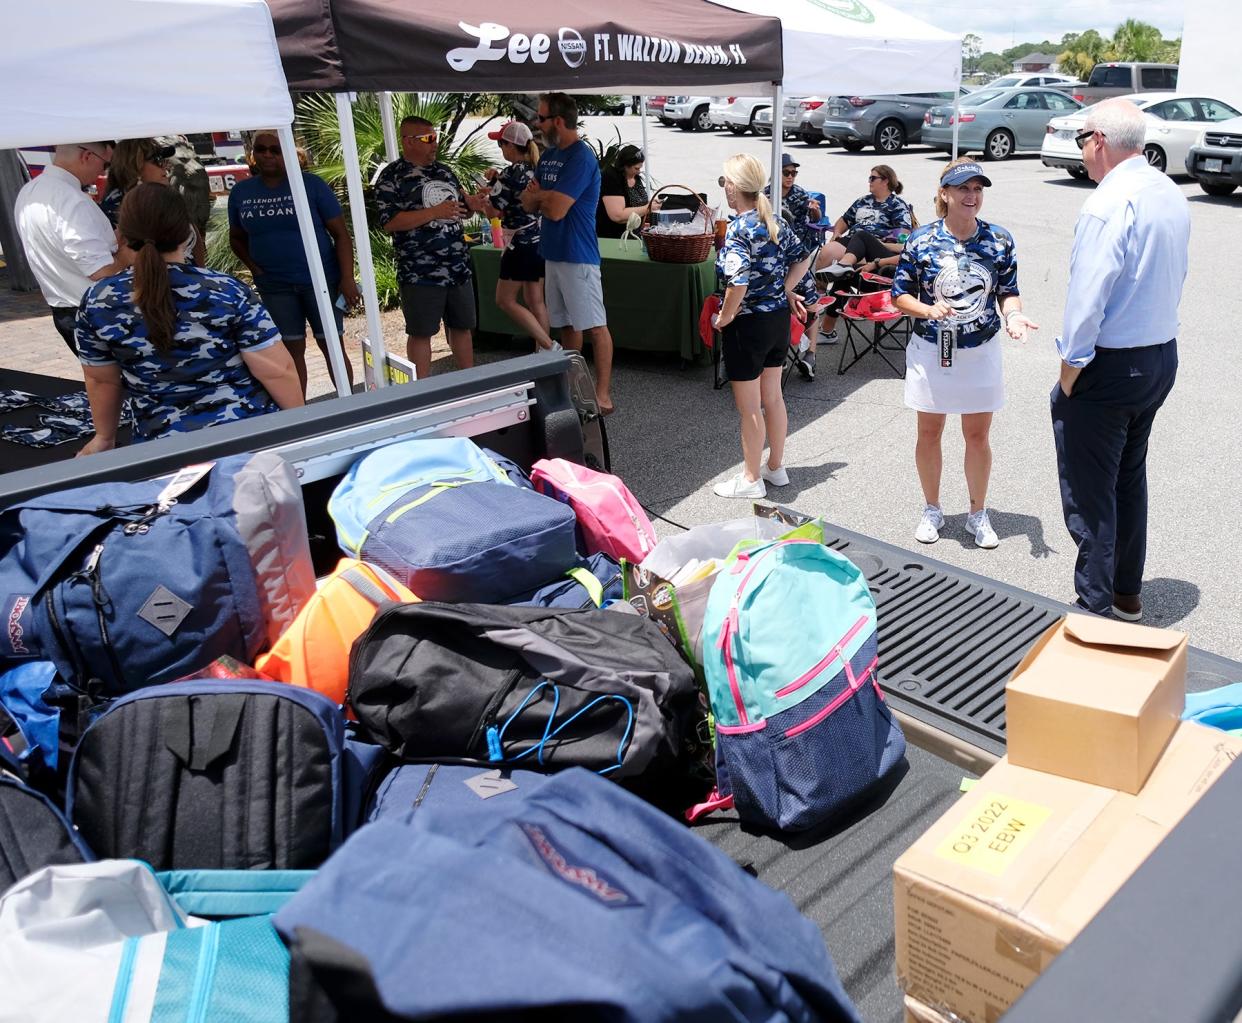 Donated backpacks stuffed with school supplies fill the bed of a truck Friday during the Emerald Coast Association of Realtors' "Cram the Van/Stuff the Truck" donation drive at AJ's on the Bayou.